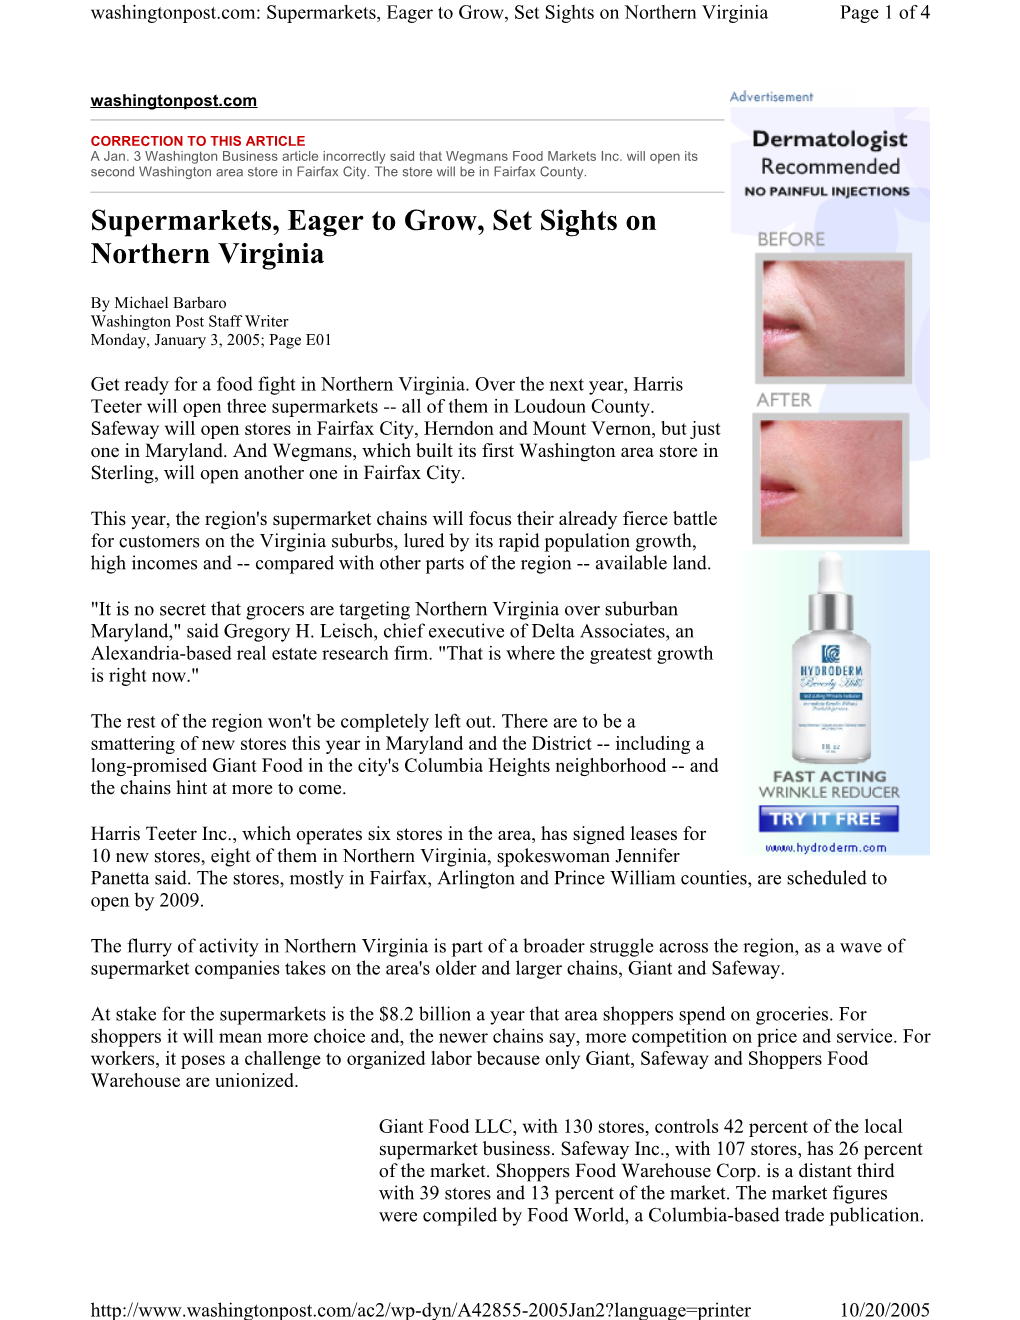 Supermarkets, Eager to Grow, Set Sights on Northern Virginia Page 1 of 4